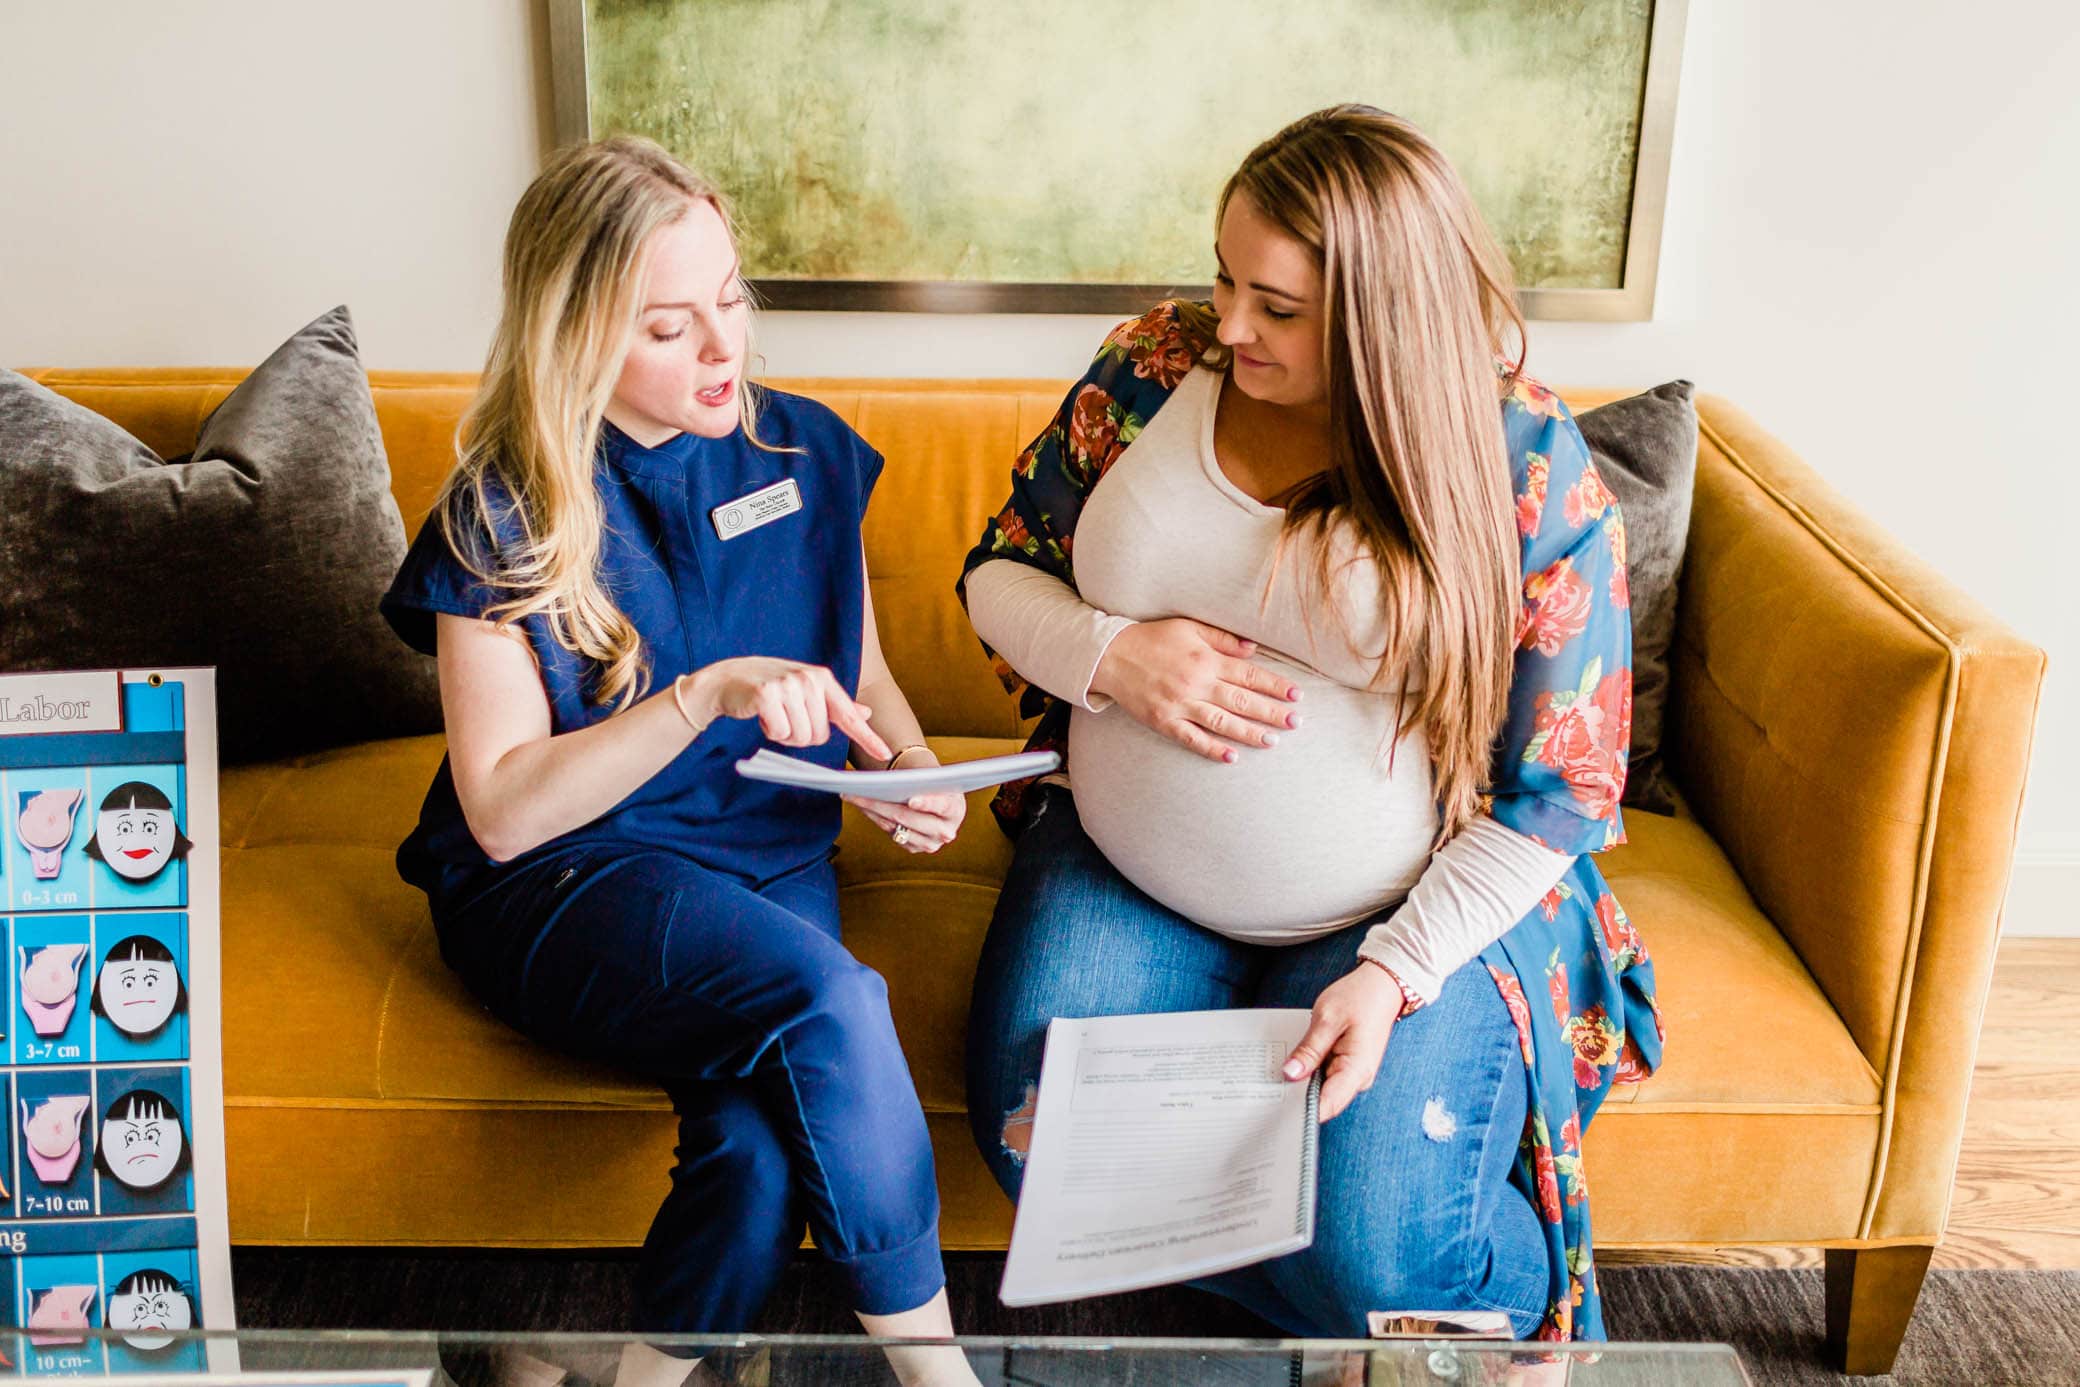 A doula sitting down with her client, a pregnancy woman, on the couch and they are looking over some printed papers and talking.